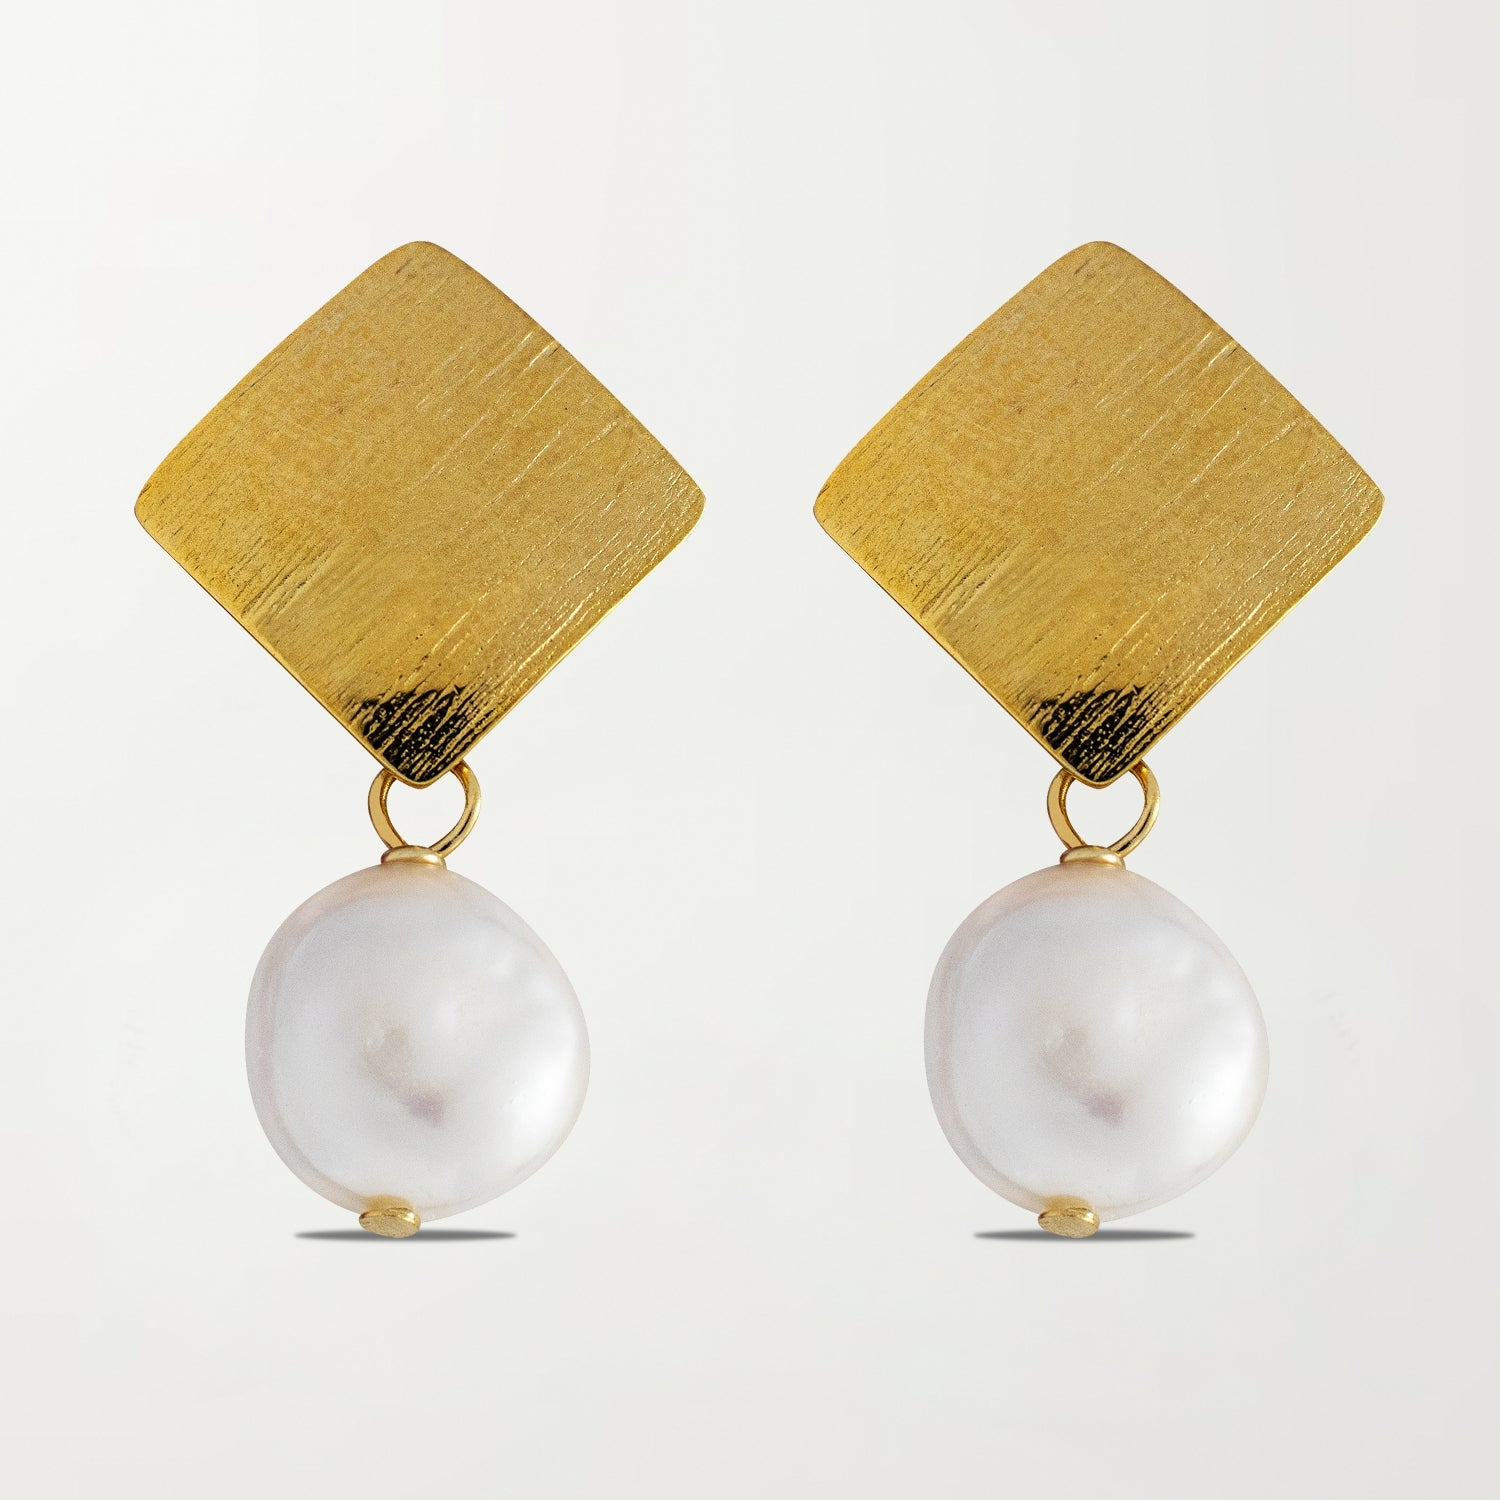 Picture of The Madrid Earrings